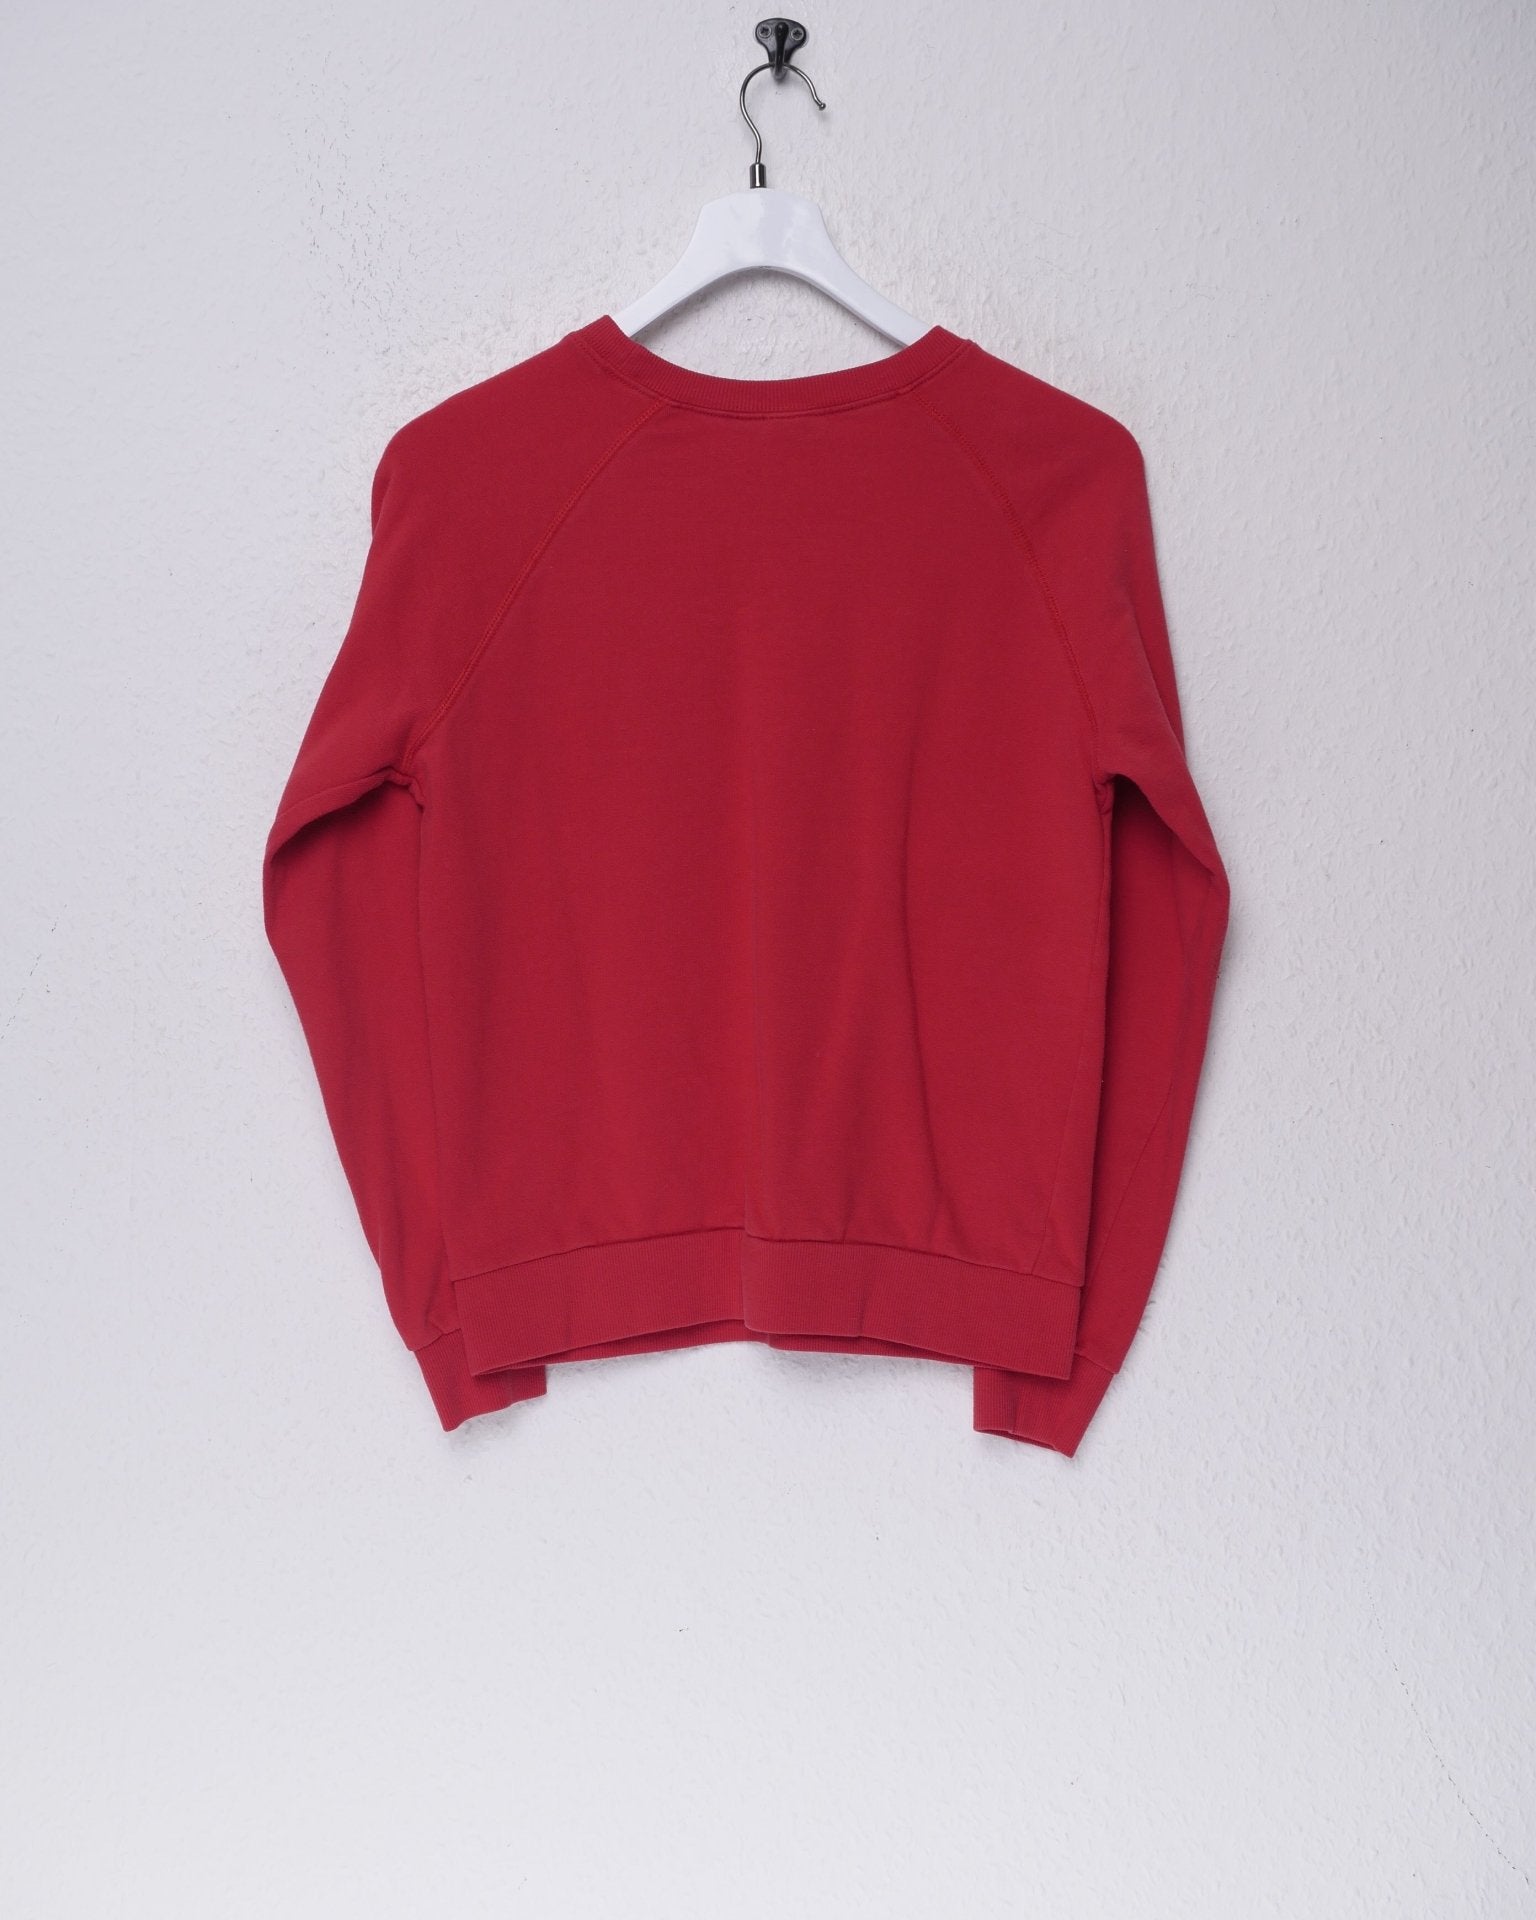 'Campbells Tomato Soup' printed Spellout red Sweater - Peeces